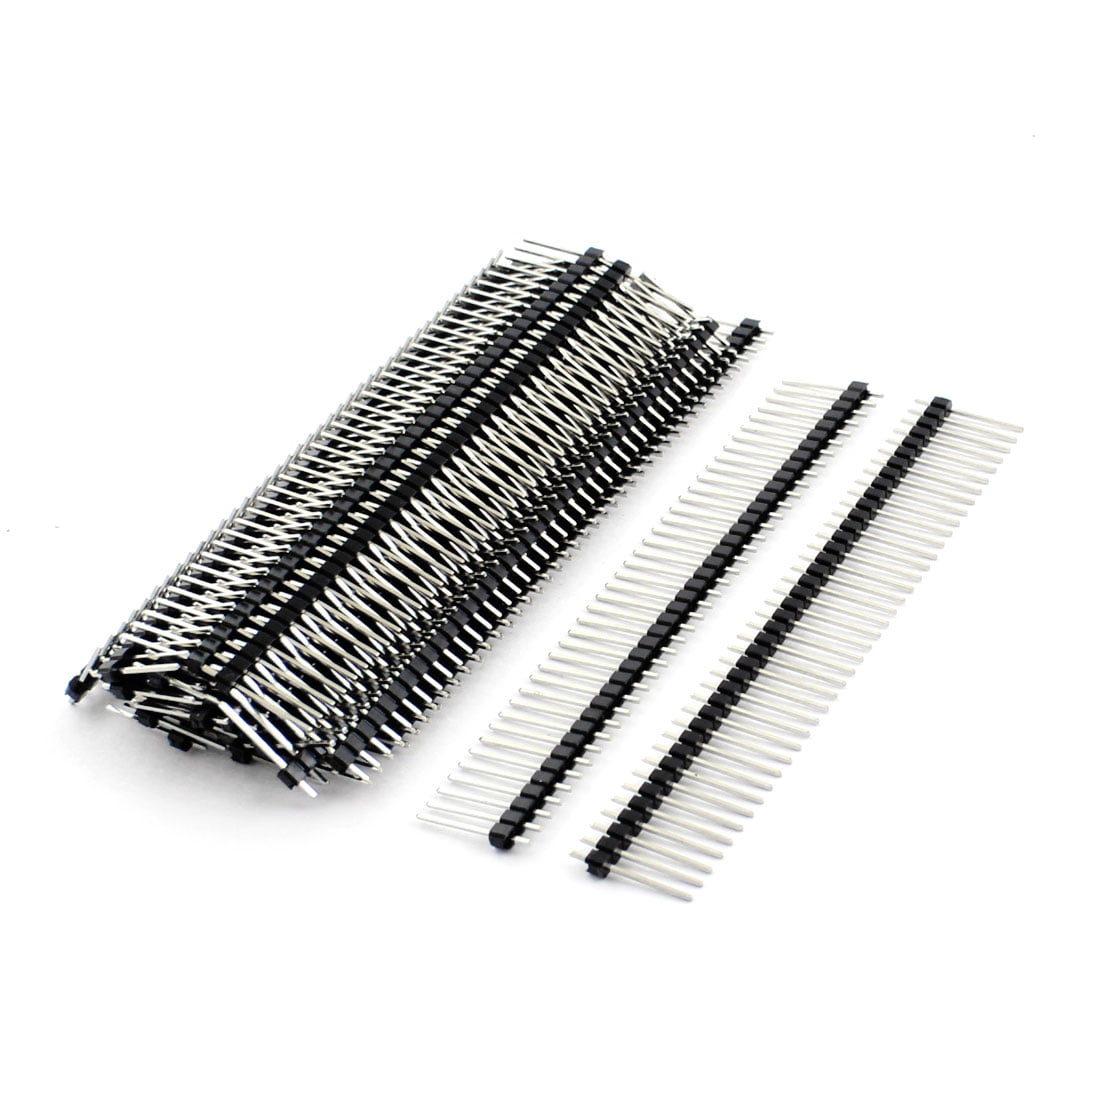 100pc Dupont 2.0mm 2mm 90° Right Angle Male Pin Header Single Row 1x40P 40P 